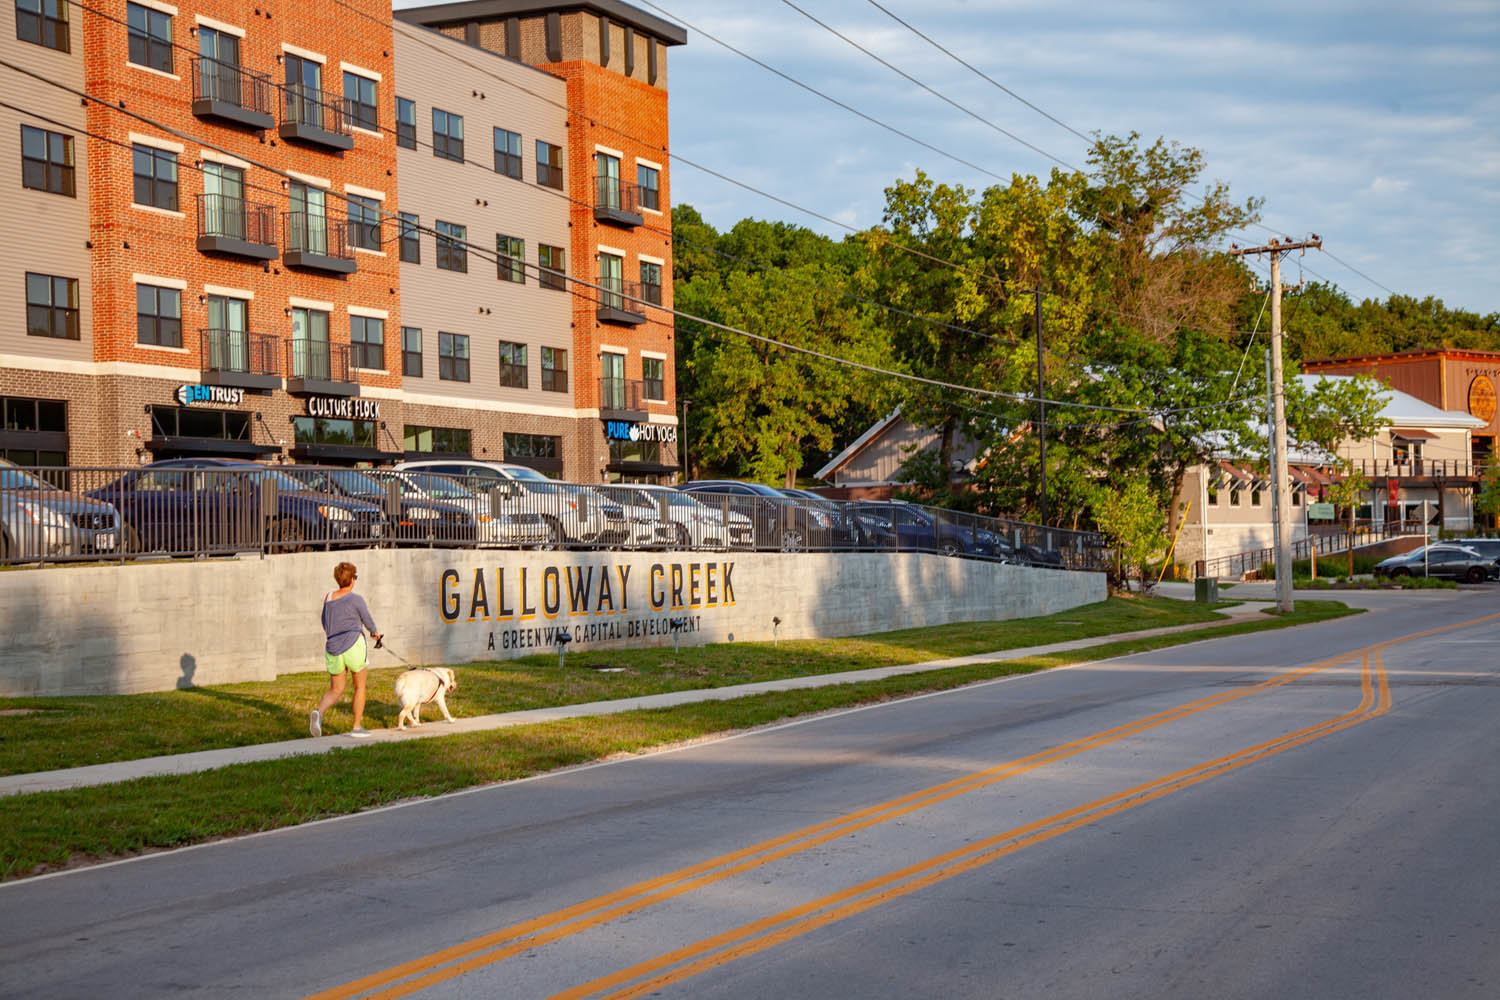 After council approval, a tax to fund the Galloway Village CID must be approved by voters.